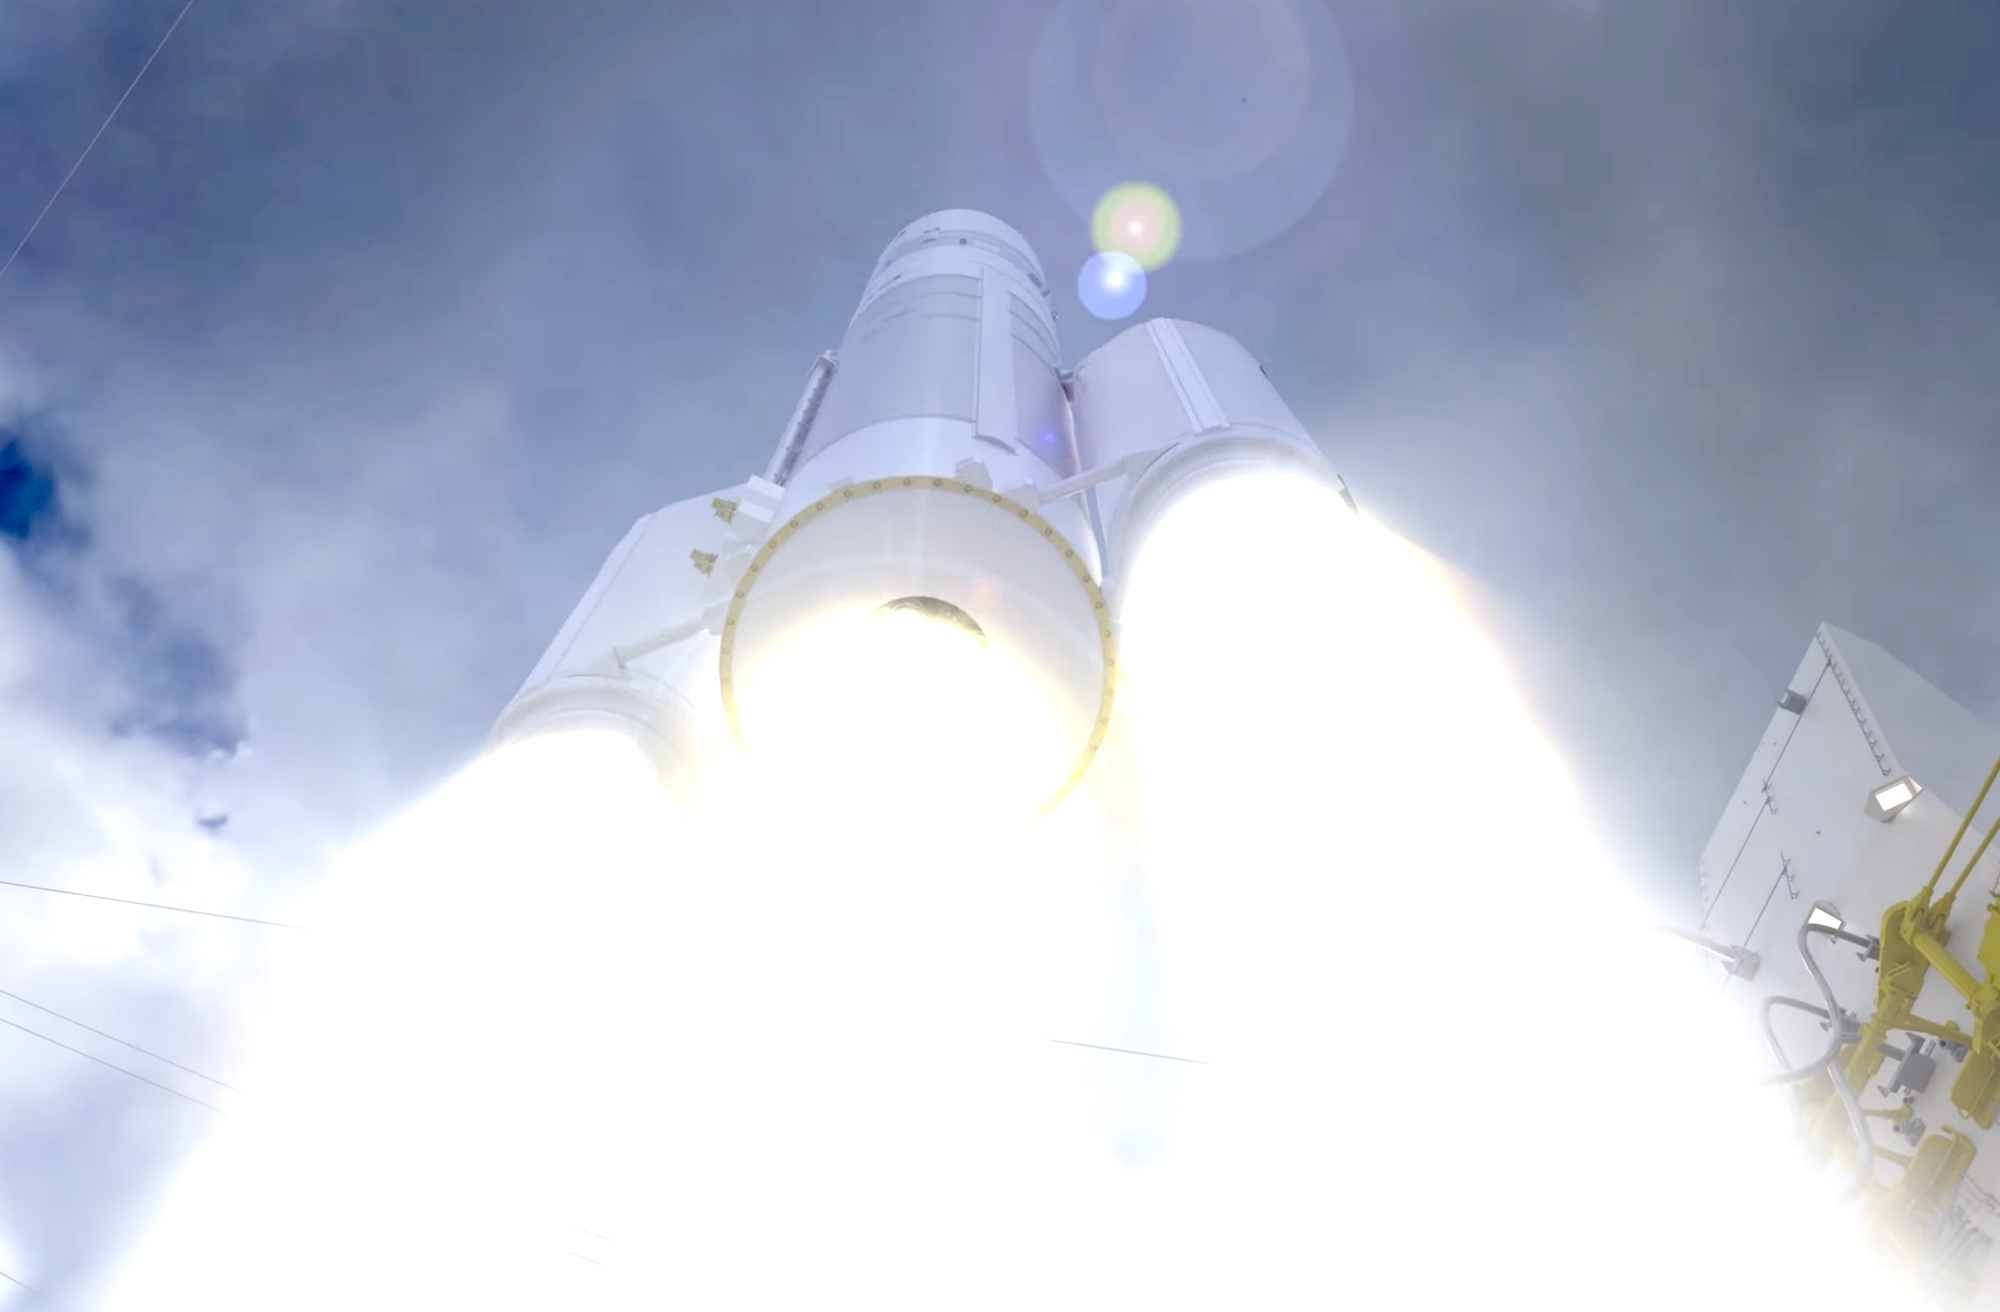 Arianespace's animation showing the launch of its next-gen Ariane 6 rocket.